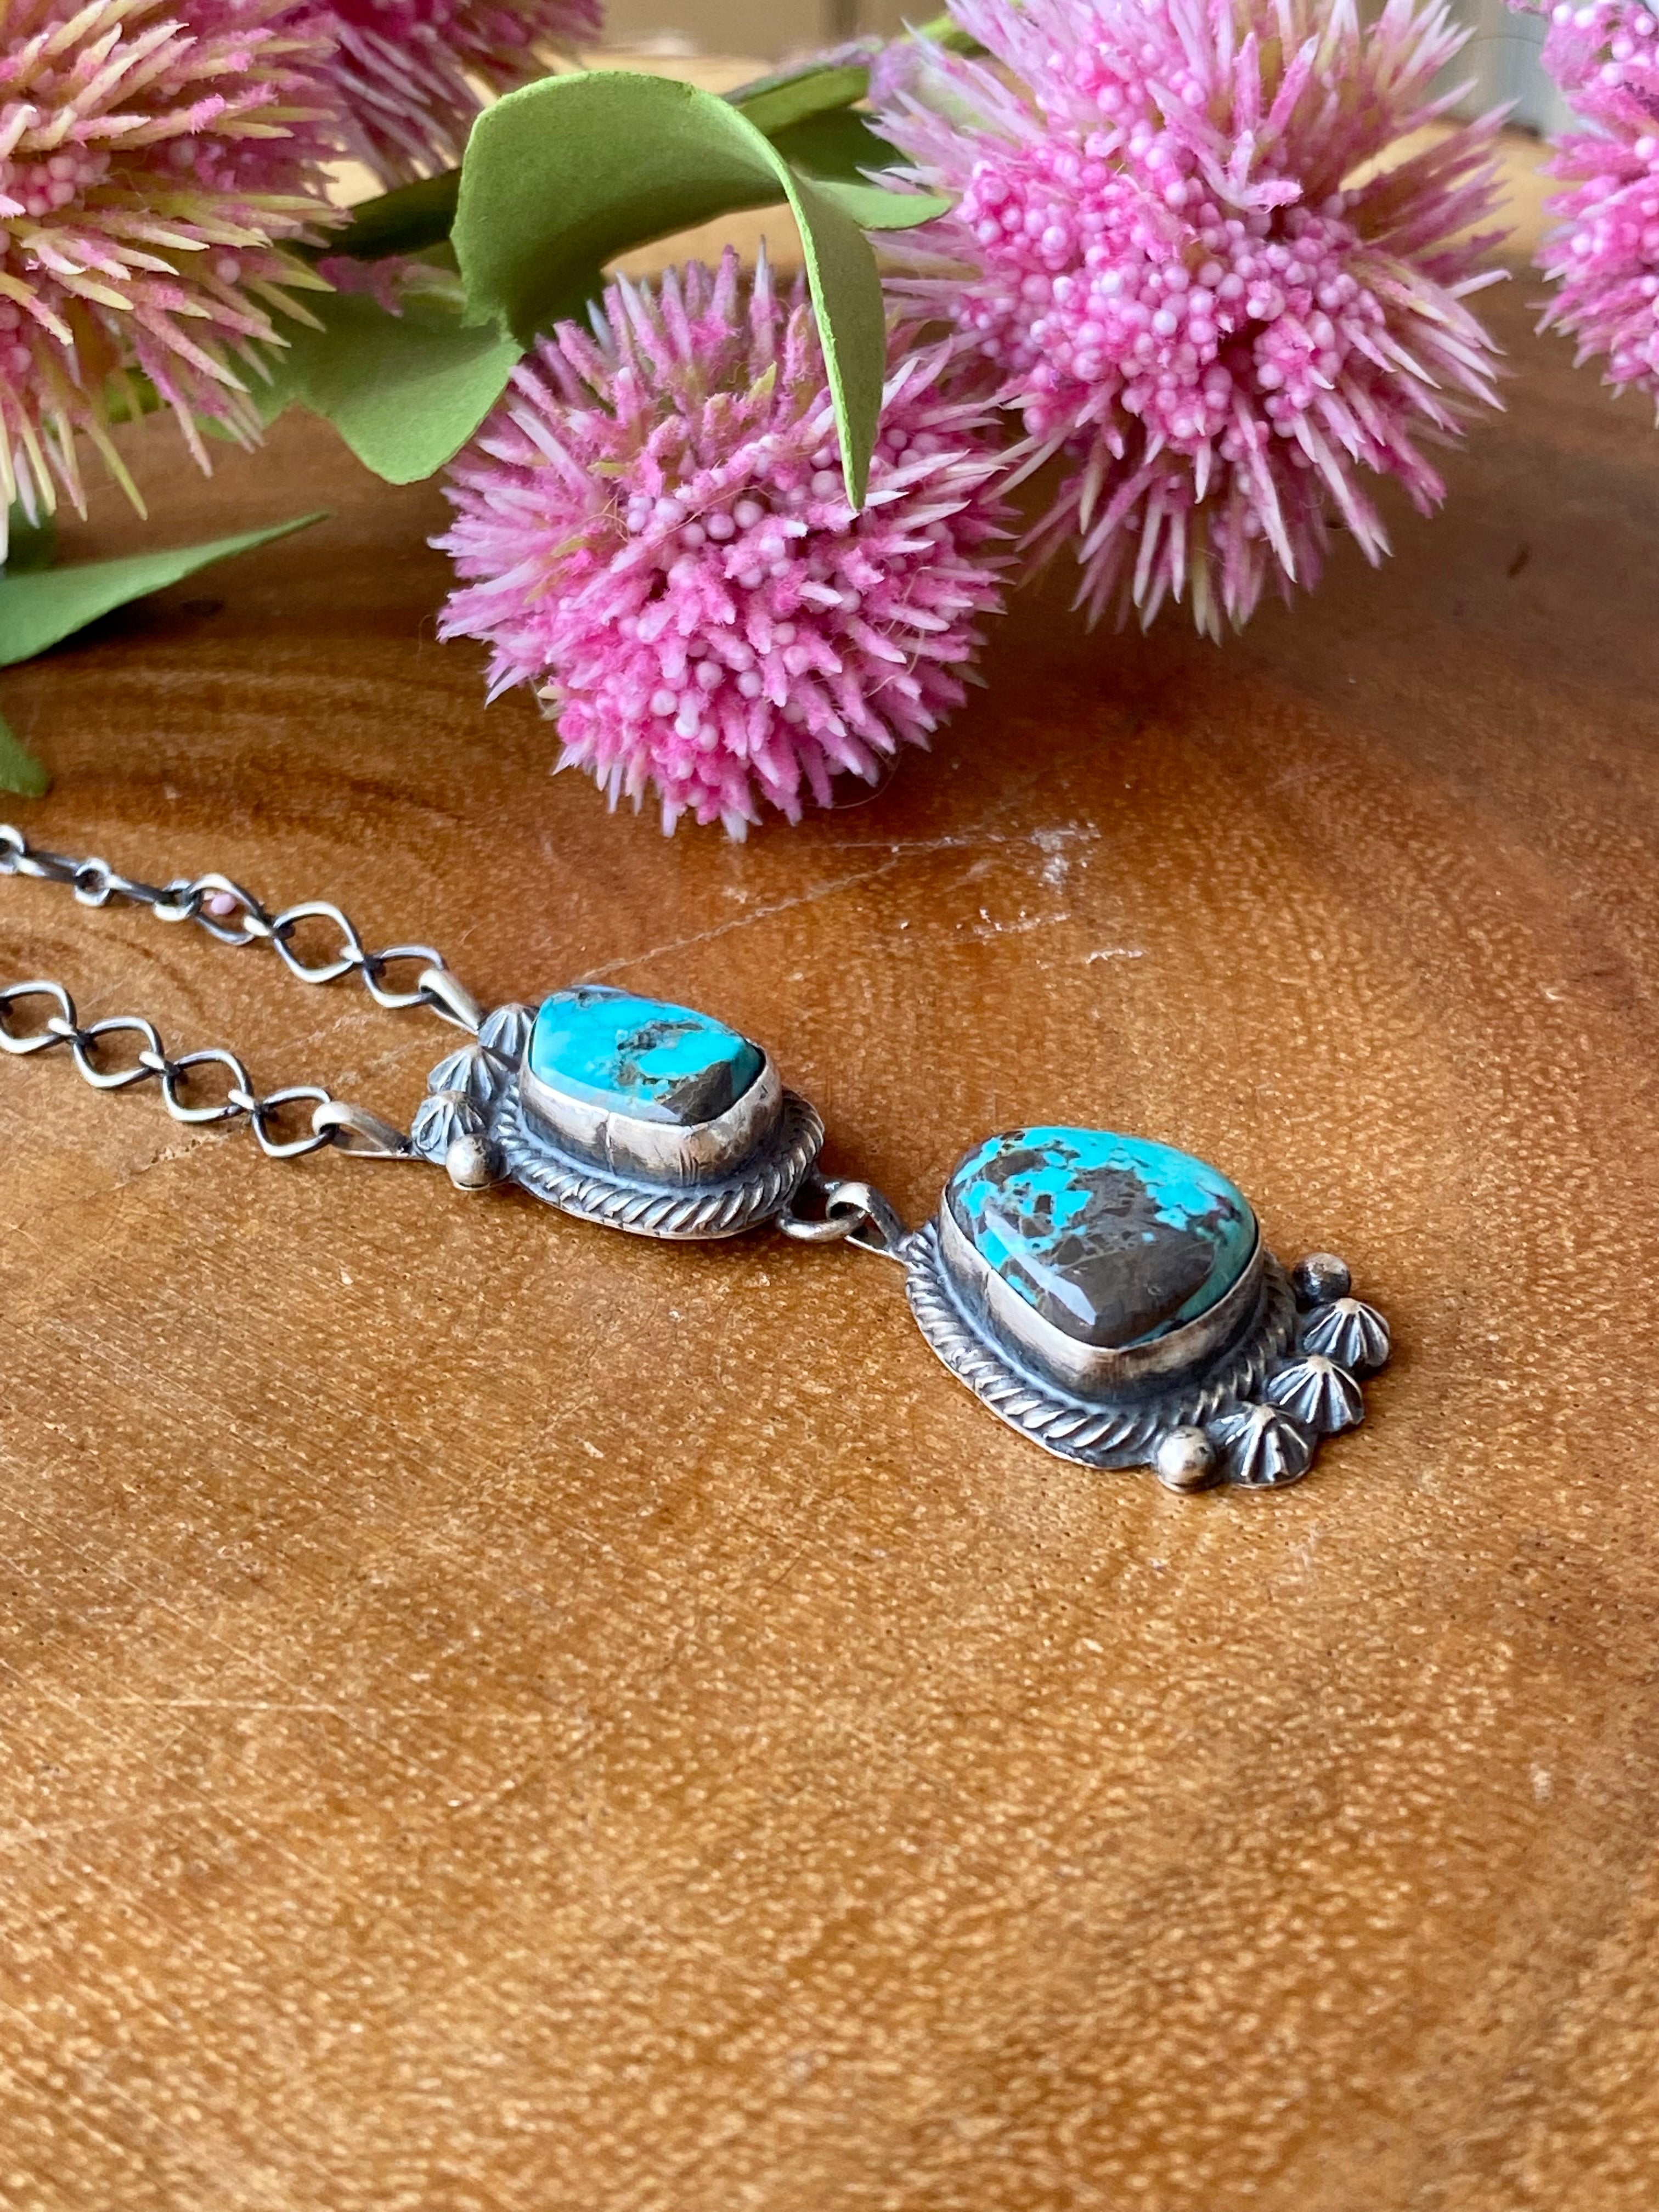 Debra Smith Kingman Turquoise & Sterling Silver Necklace